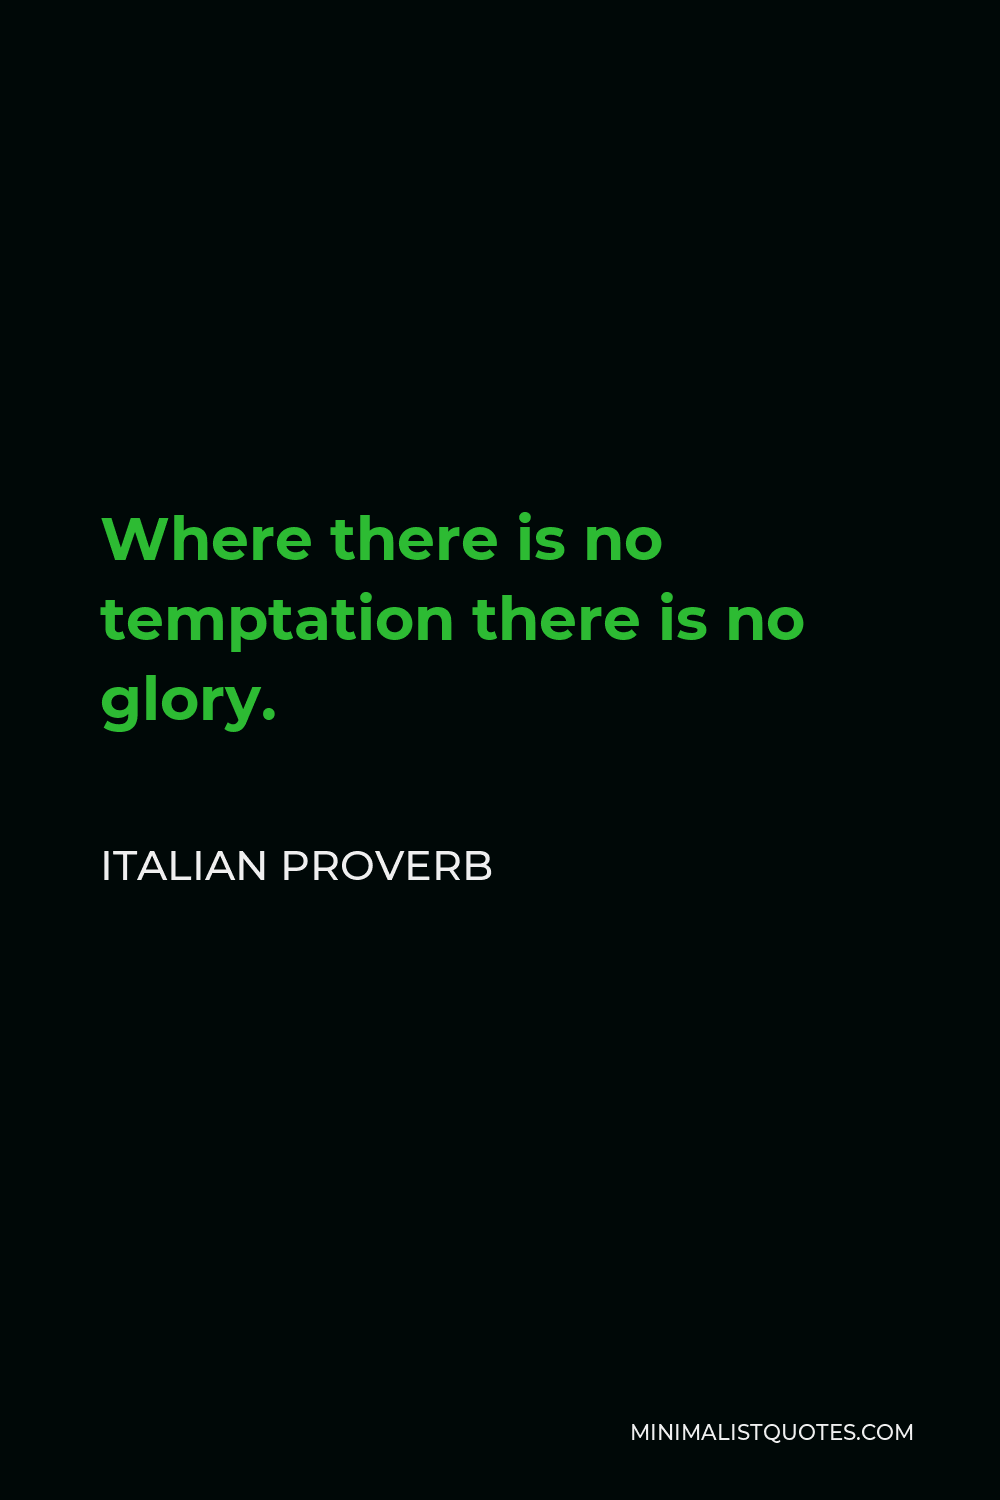 Italian Proverb Quote - Where there is no temptation there is no glory.